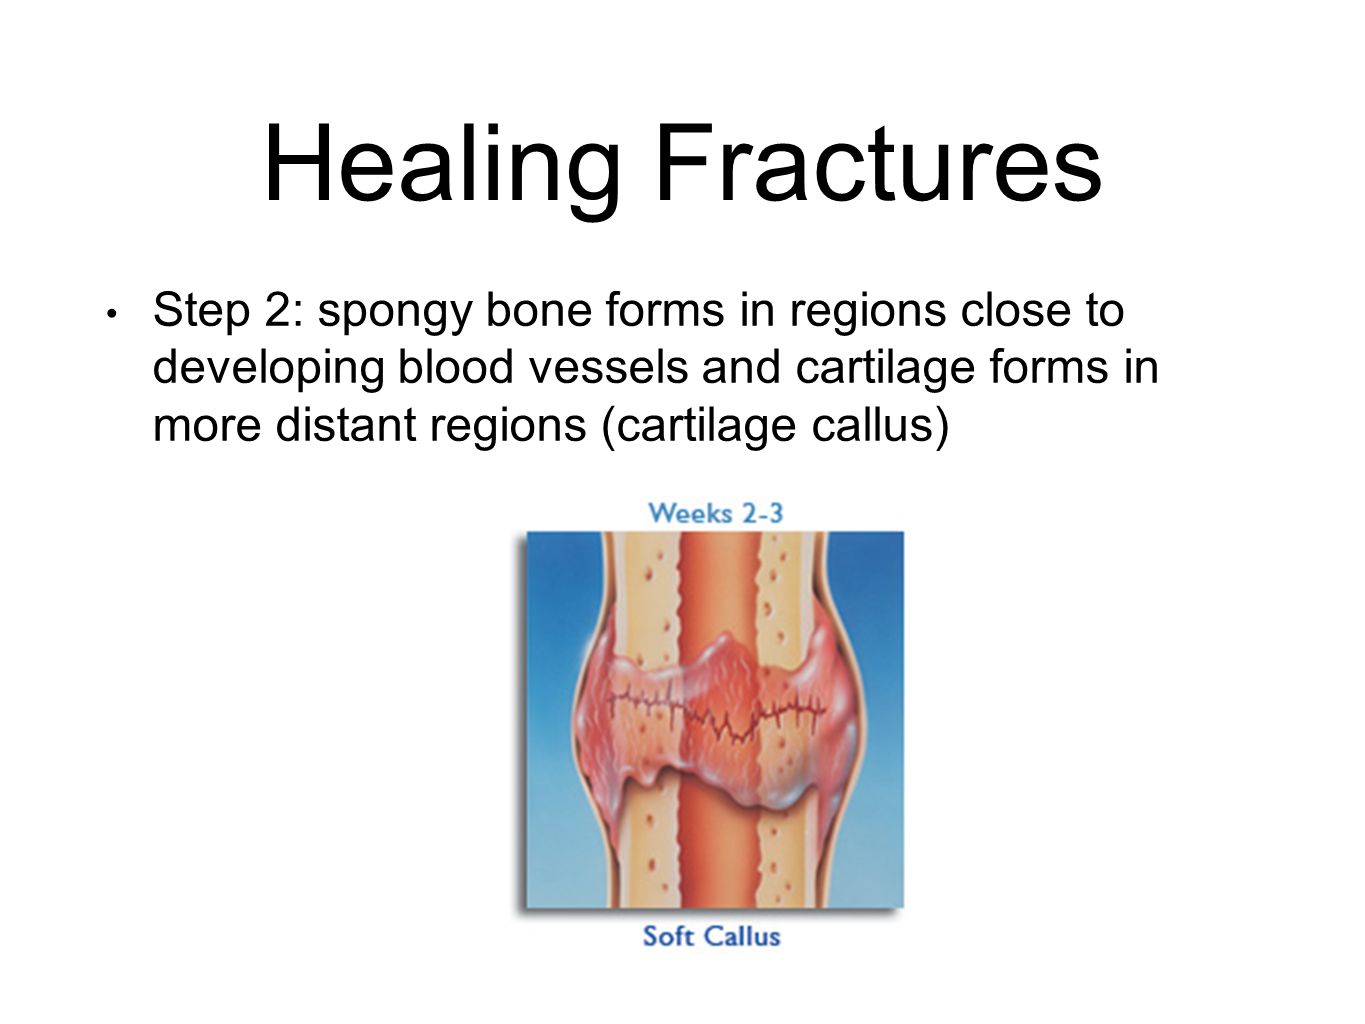 Healing Fractures Step 2: spongy bone forms in regions close to developing blood vessels and cartilage forms in more distant regions (cartilage callus)